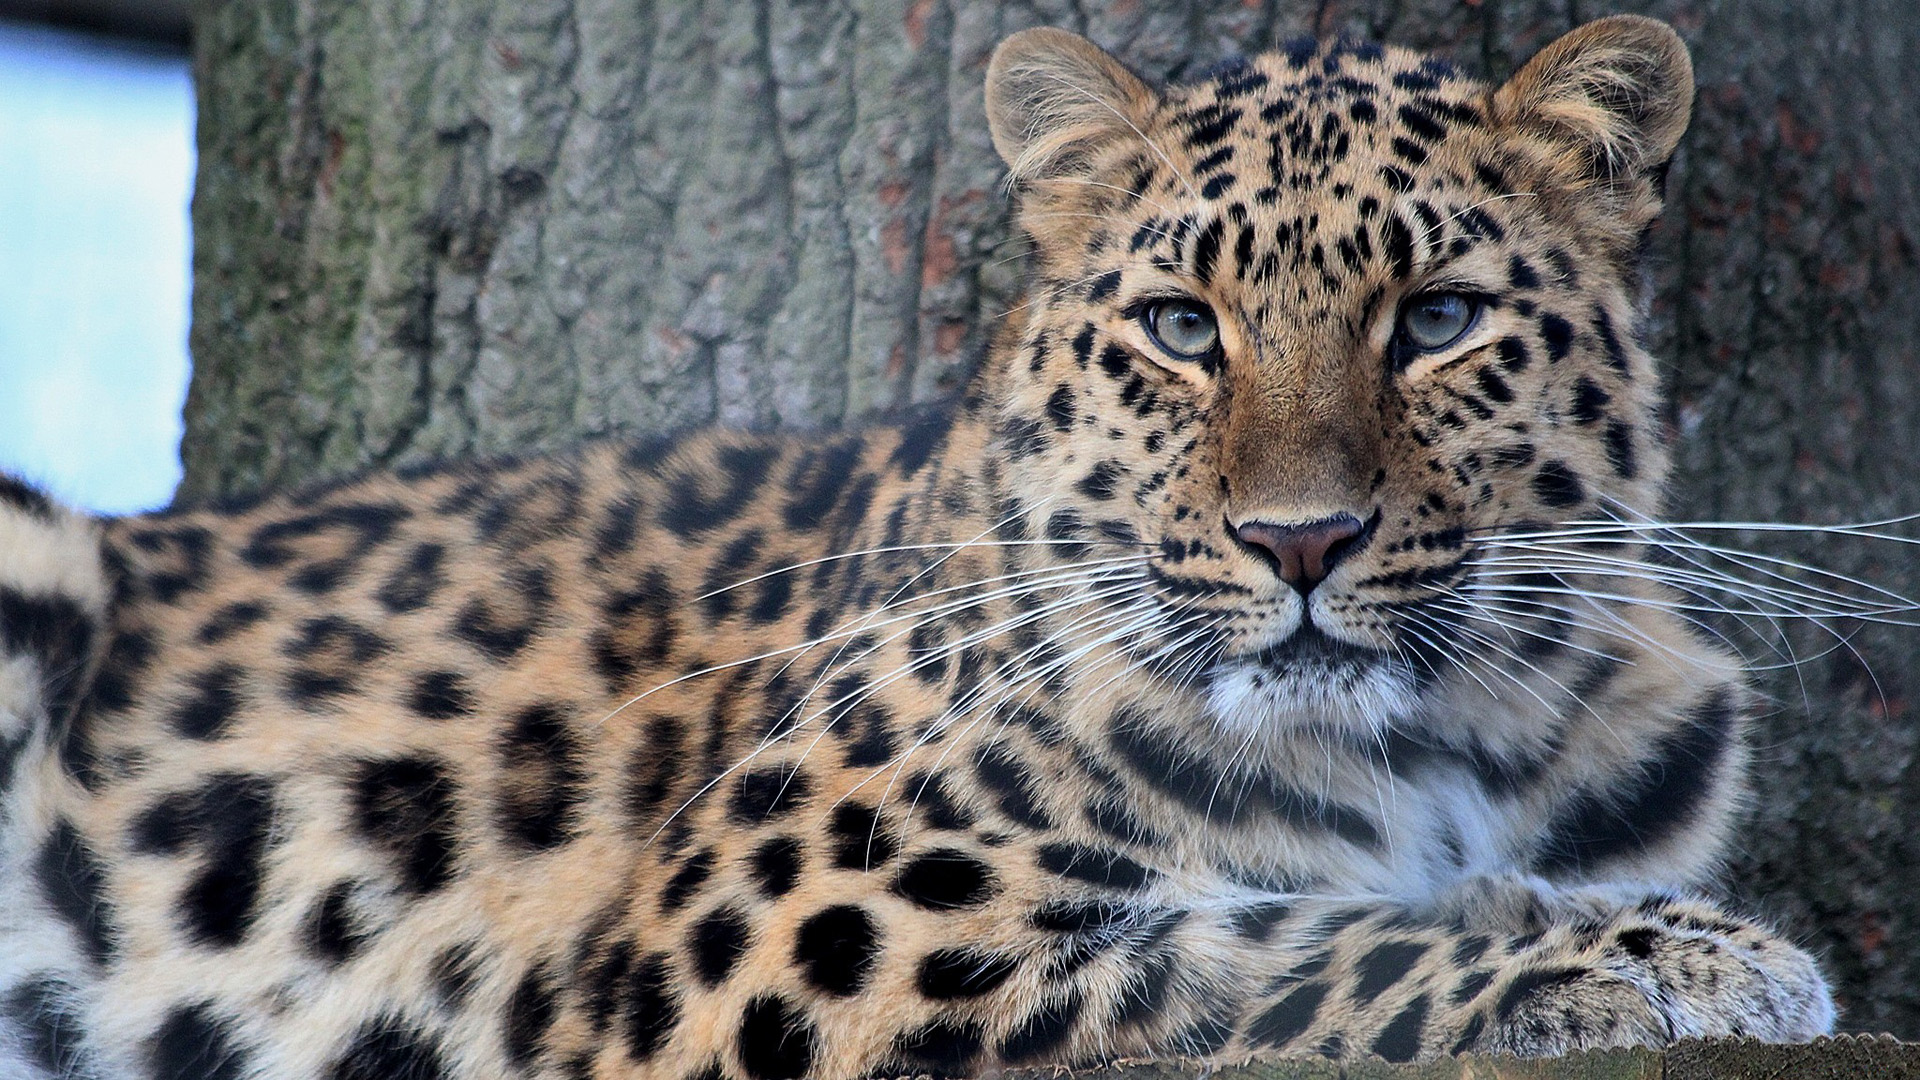 Download Leopard wallpapers for mobile phone, free Leopard HD pictures